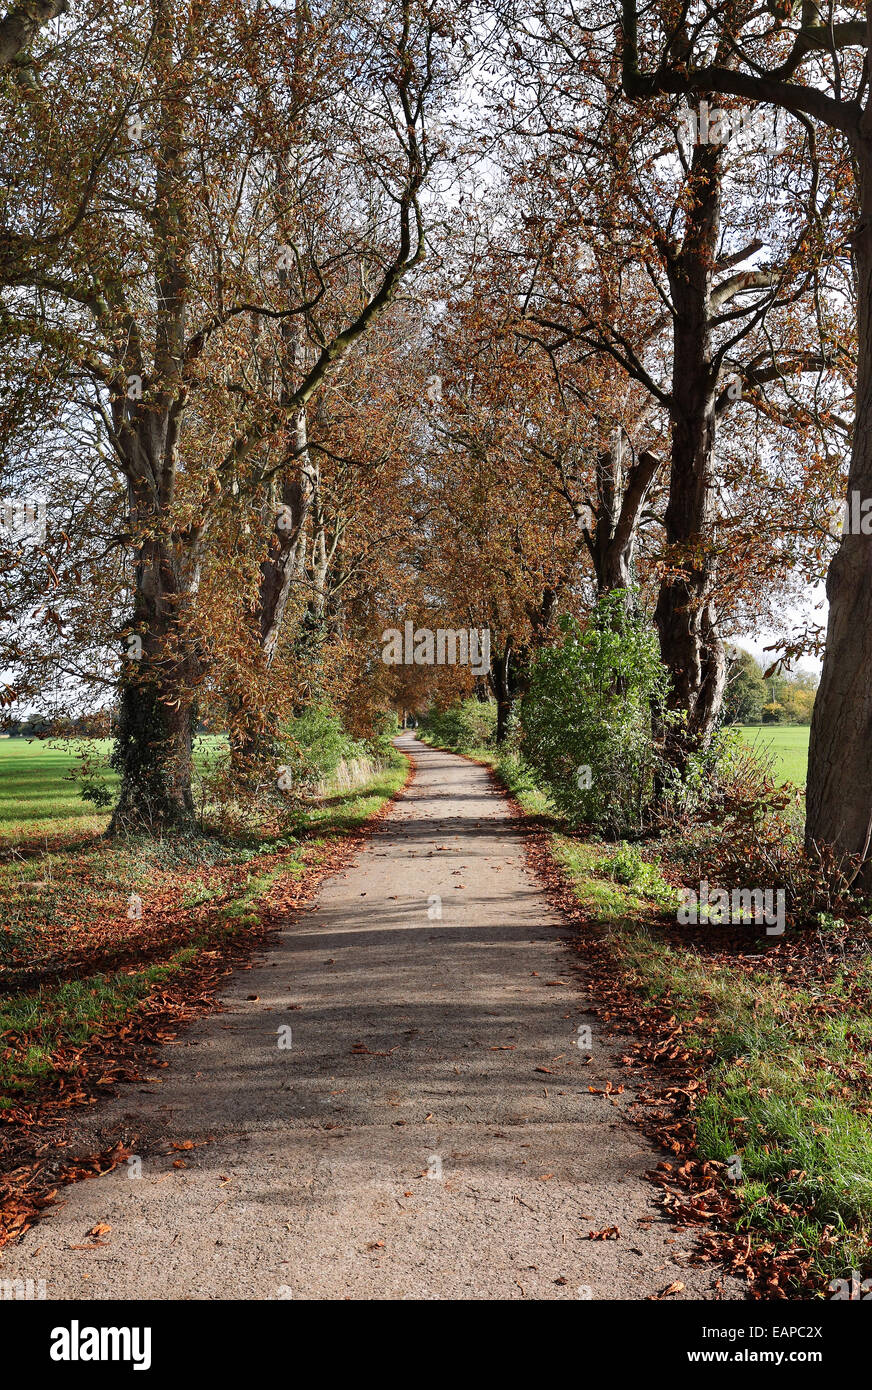 Autumn scene along a quiet lane in rural England between an avenue of Horse Chestnut trees Stock Photo